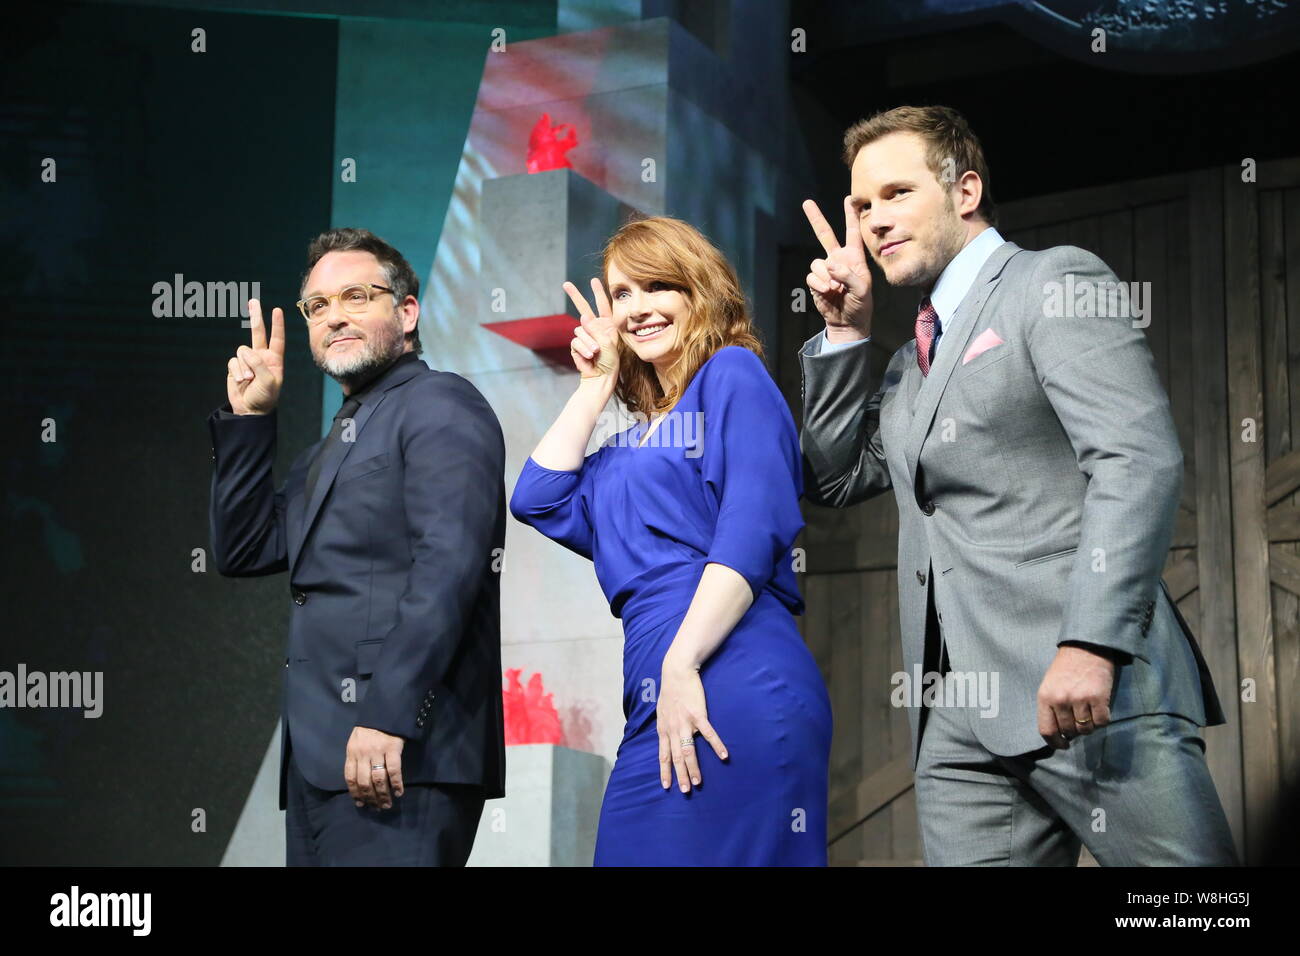 (From left) American director Colin Trevorrow, actress Judy Greer and actor Chris Pratt pose during a press conference for their movie 'Jurassic World Stock Photo